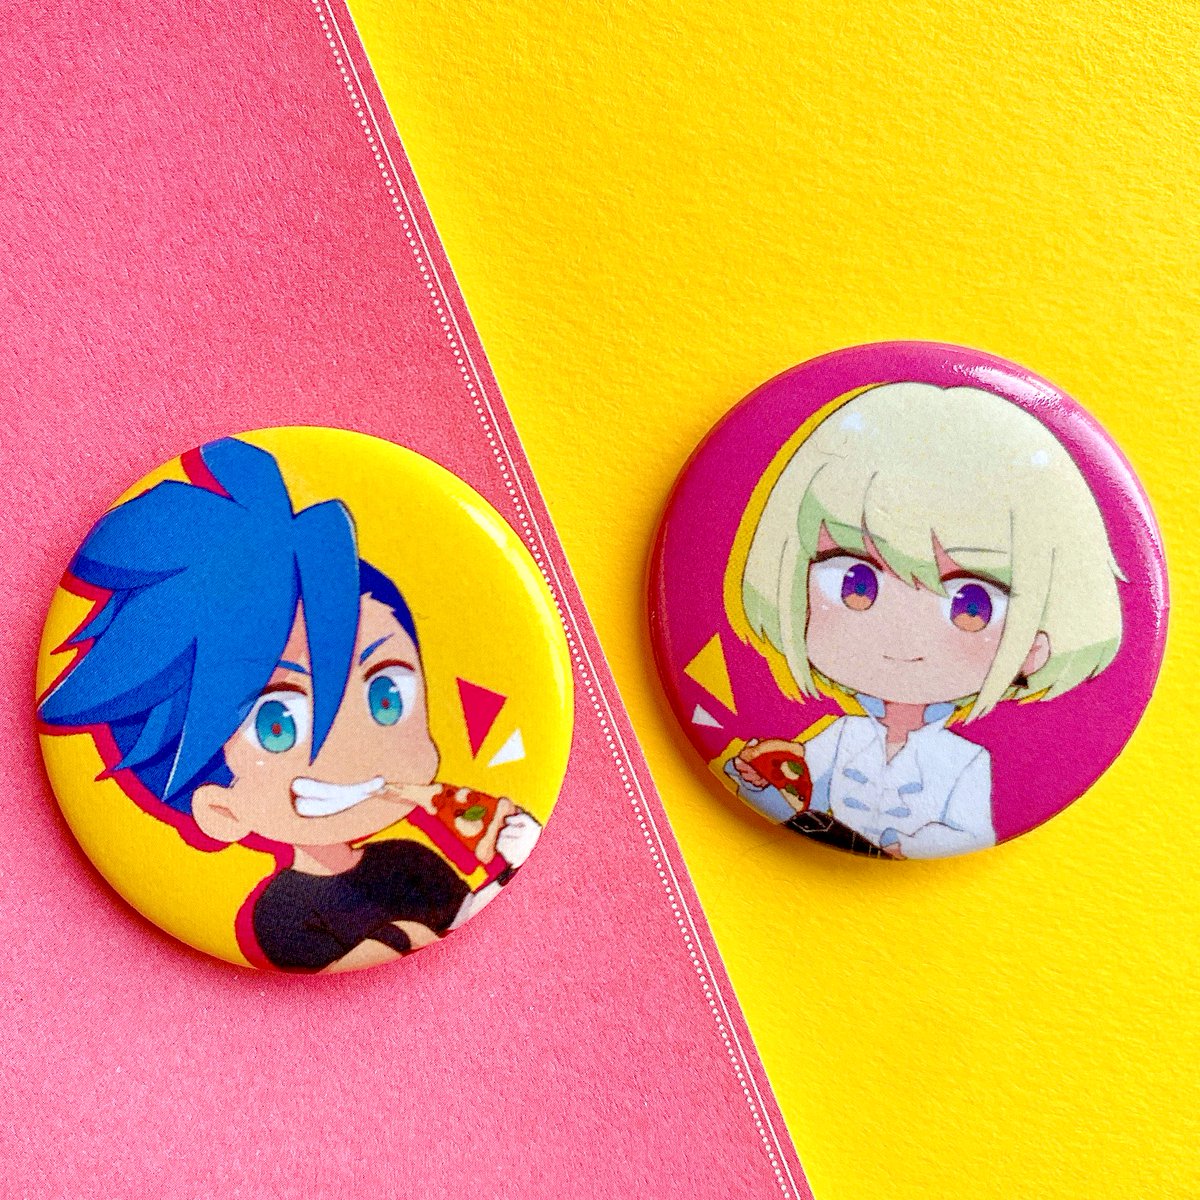 my Etsy shop is now open!?

https://t.co/3DXYdrXBFm

I made some of my favorites, Promare, Gundam, Demon Slayer, etc. into stickers and badges! I'm also planning to add a couple more such as charms, so please check it out if you're interested! 